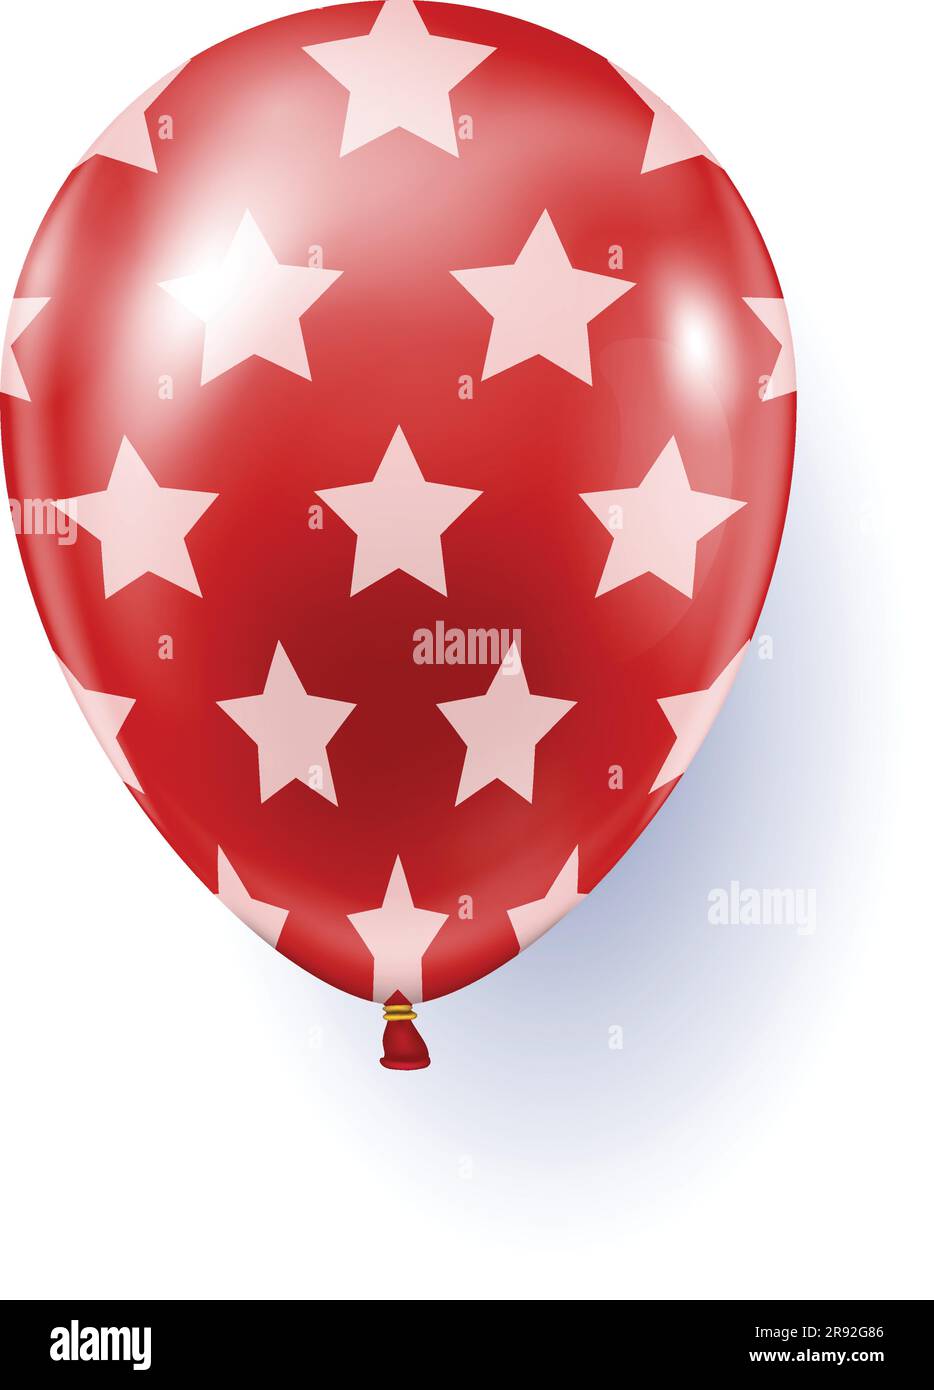 Red balloons with white stars. Stock Vector